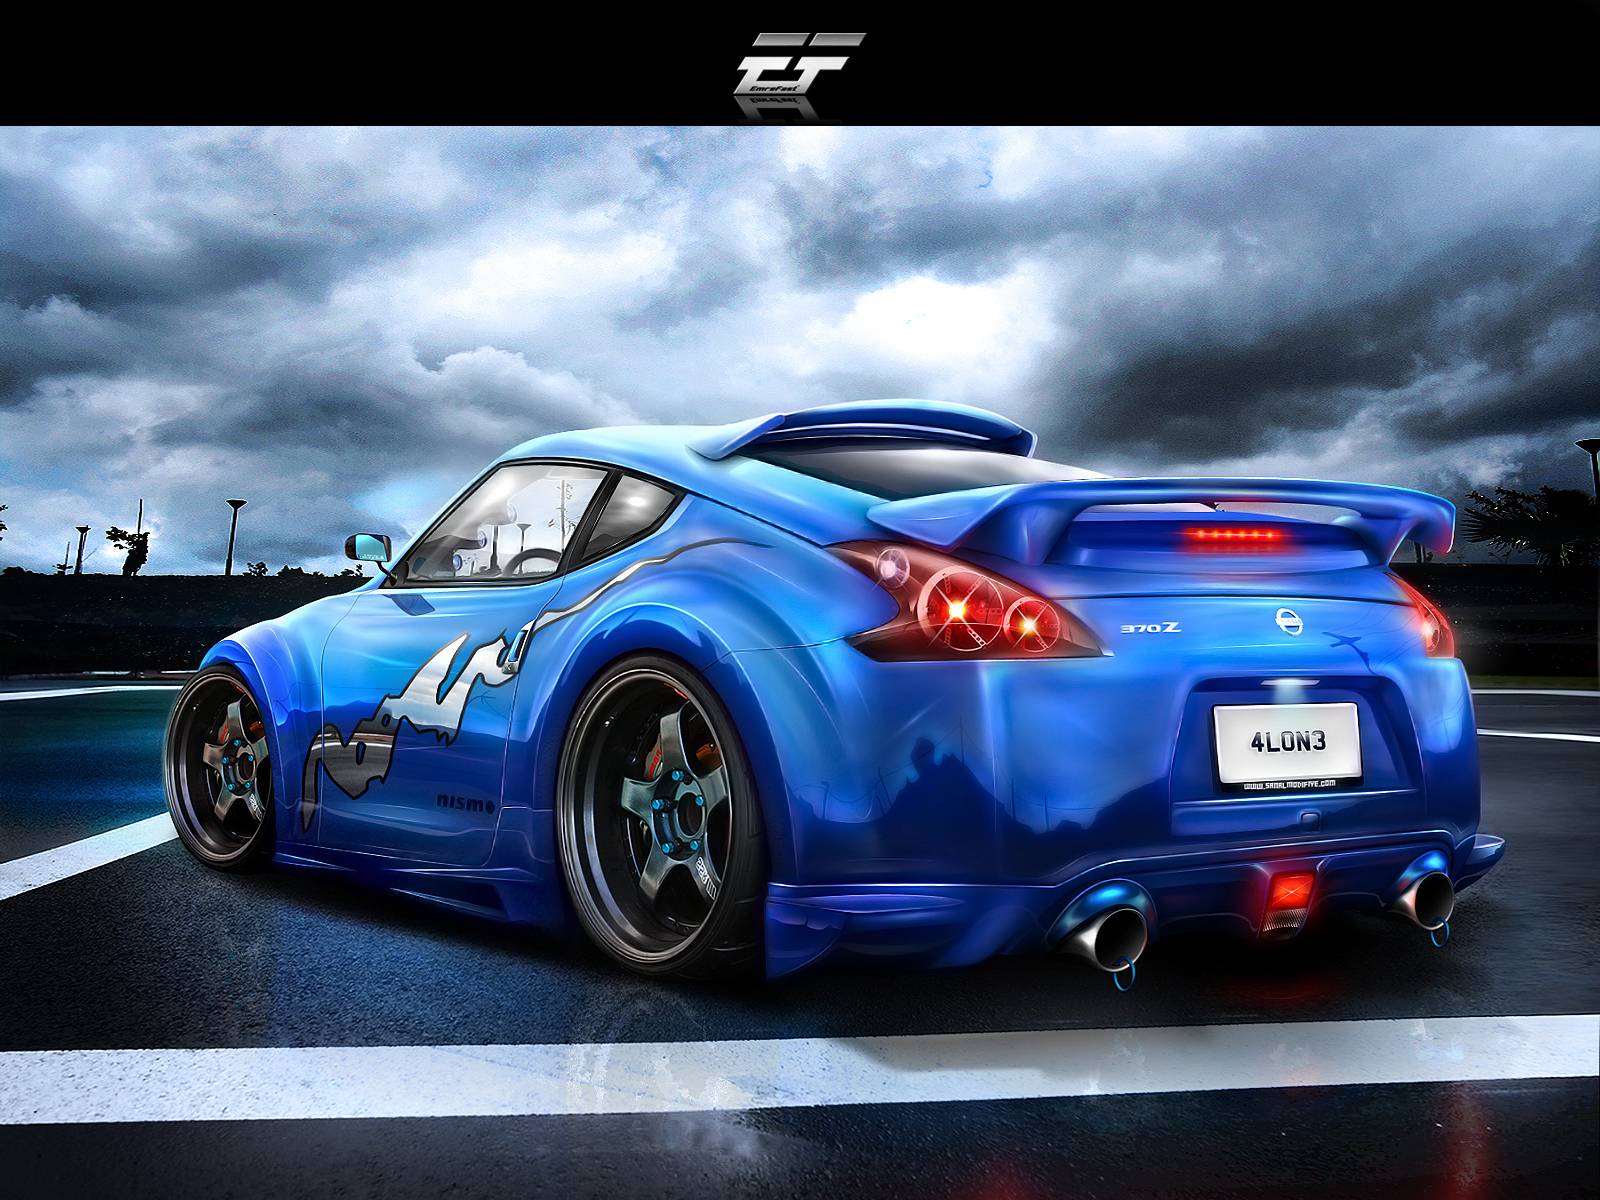 Animated Edited Wallpaper Nissan 370Z Blue Sport Car Ready To Race